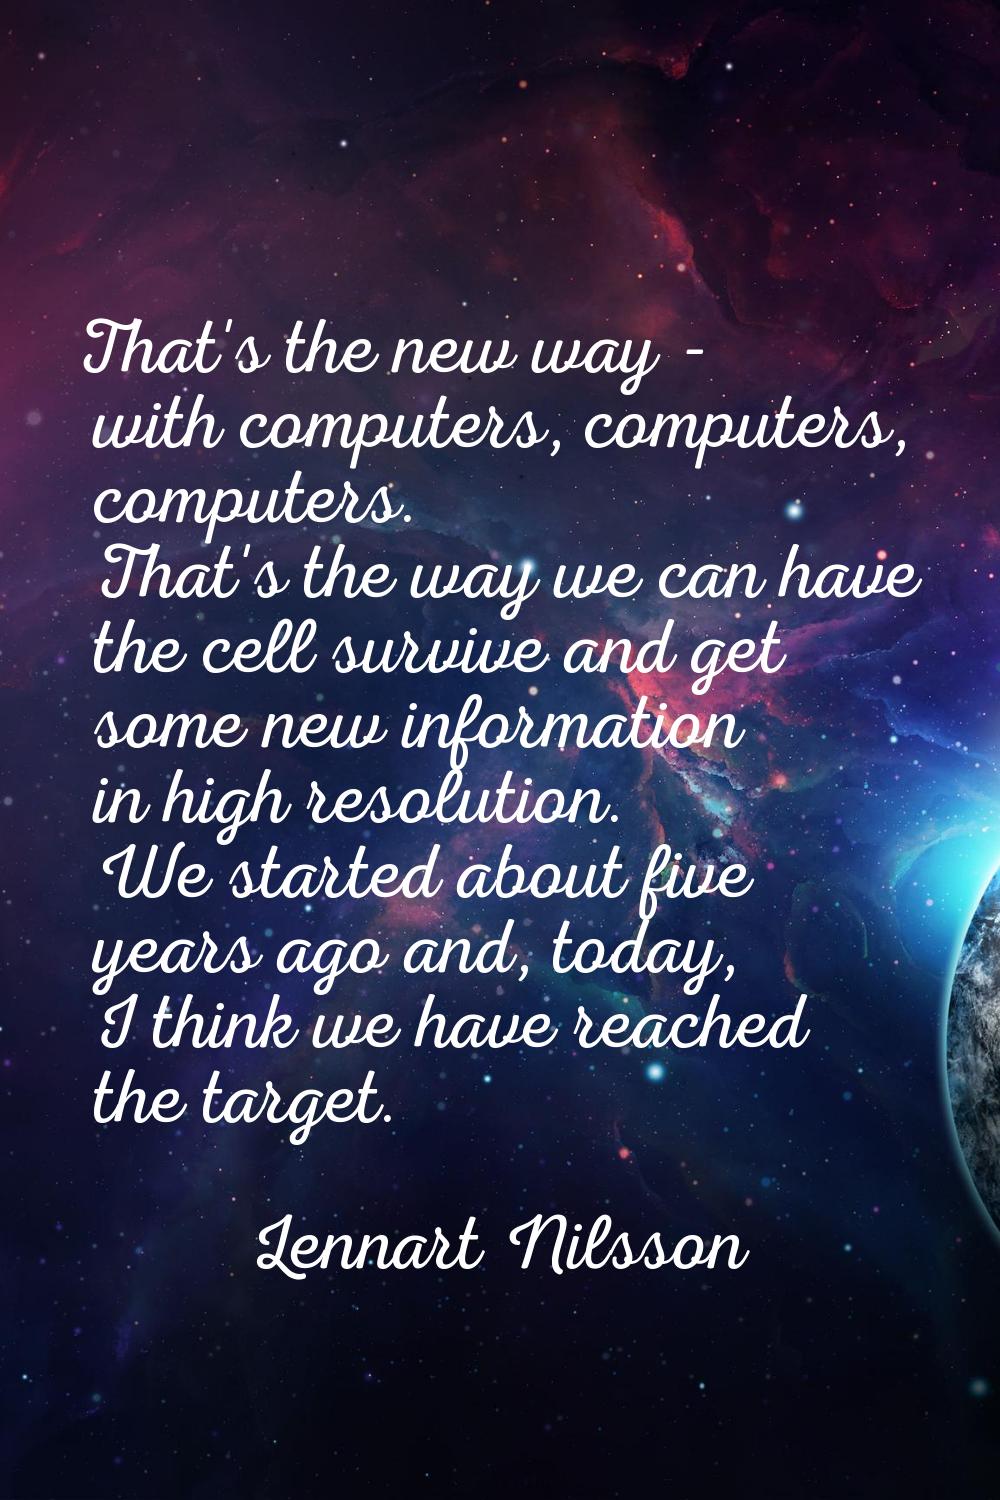 That's the new way - with computers, computers, computers. That's the way we can have the cell surv